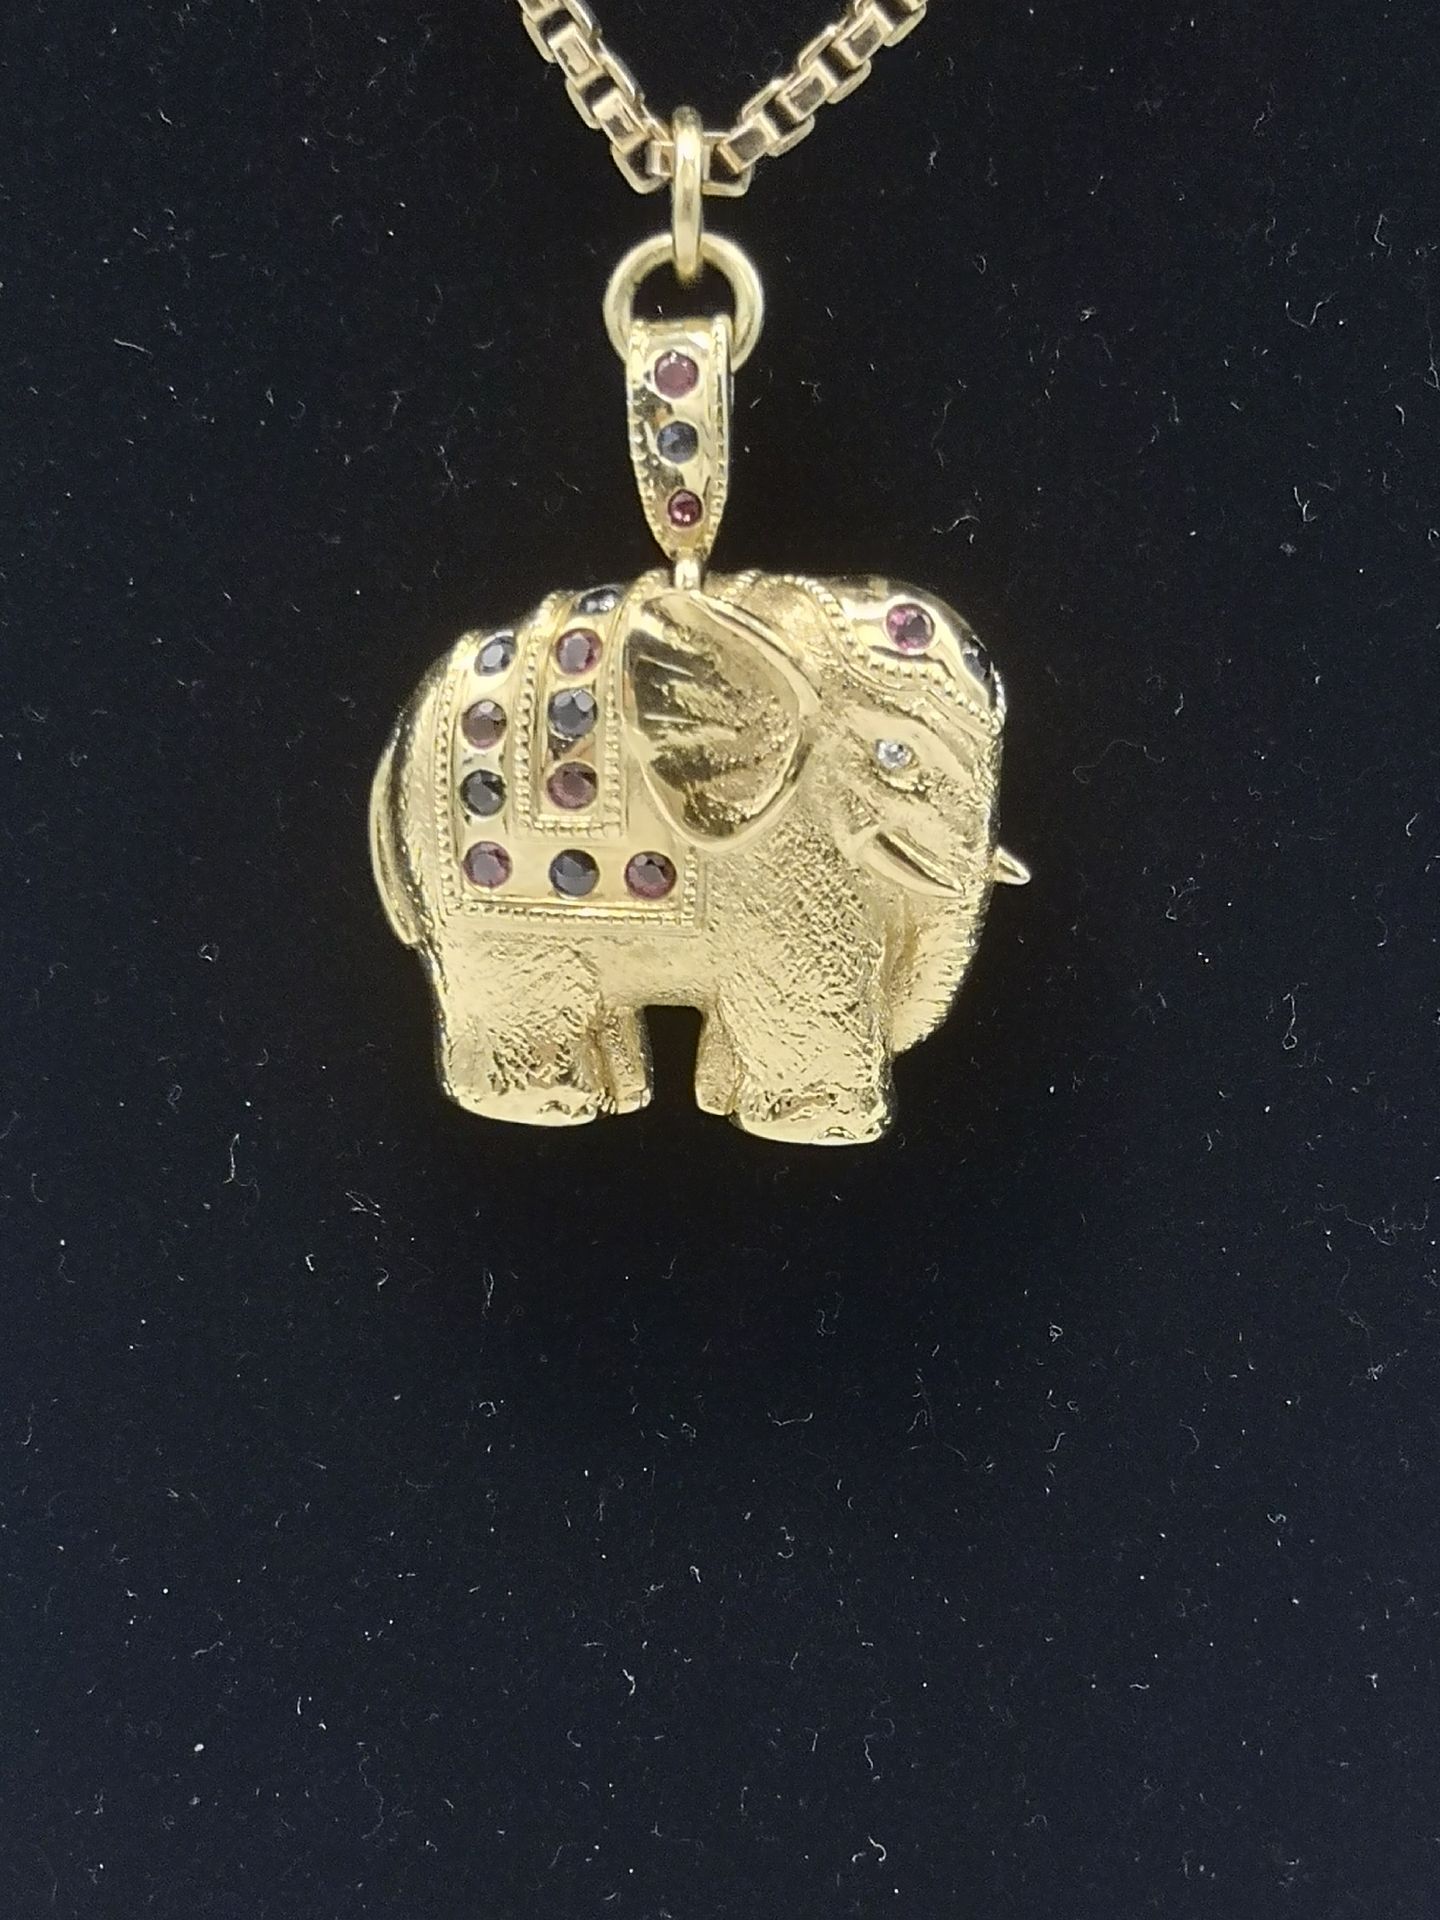 18ct gold elephant pendant set with gemstones on 18ct gold chain - Image 4 of 11